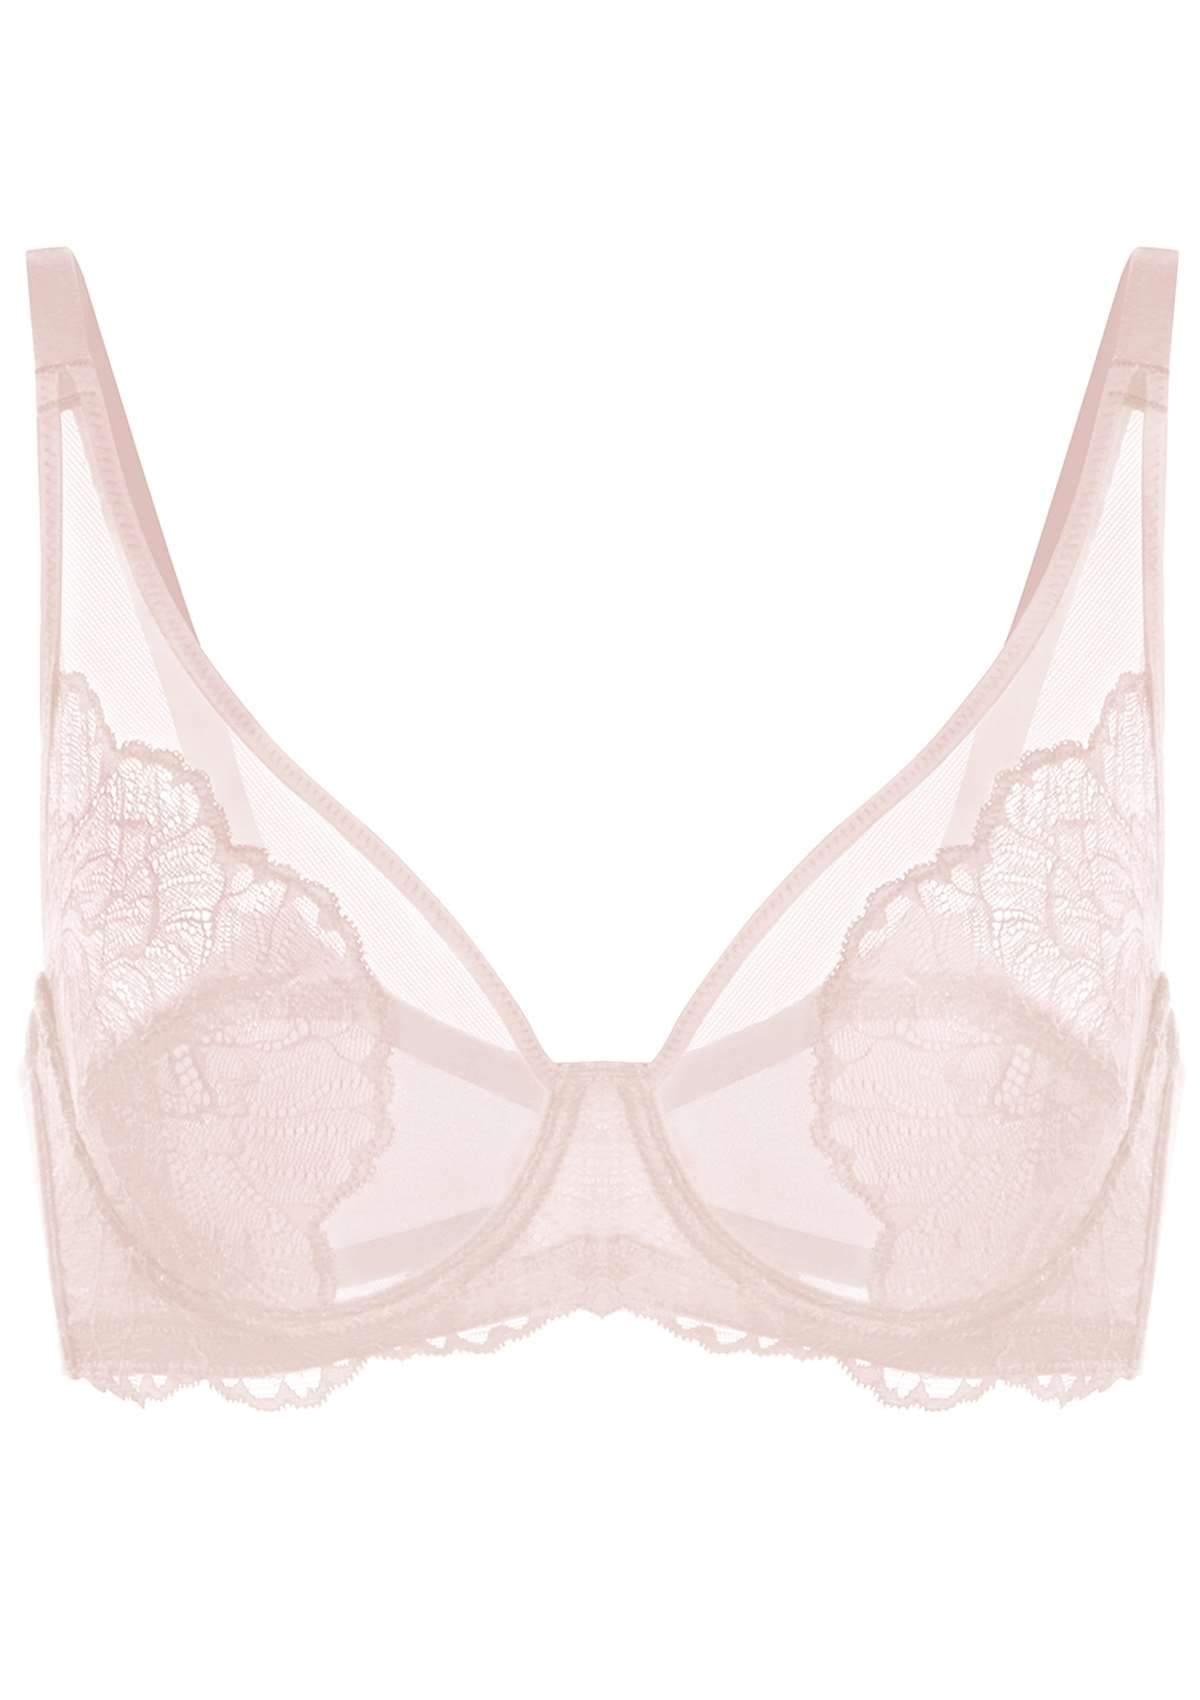 HSIA Blossom Lace Bra And Panties Set: Best Bra For Large Busts - Dark Pink / 38 / G